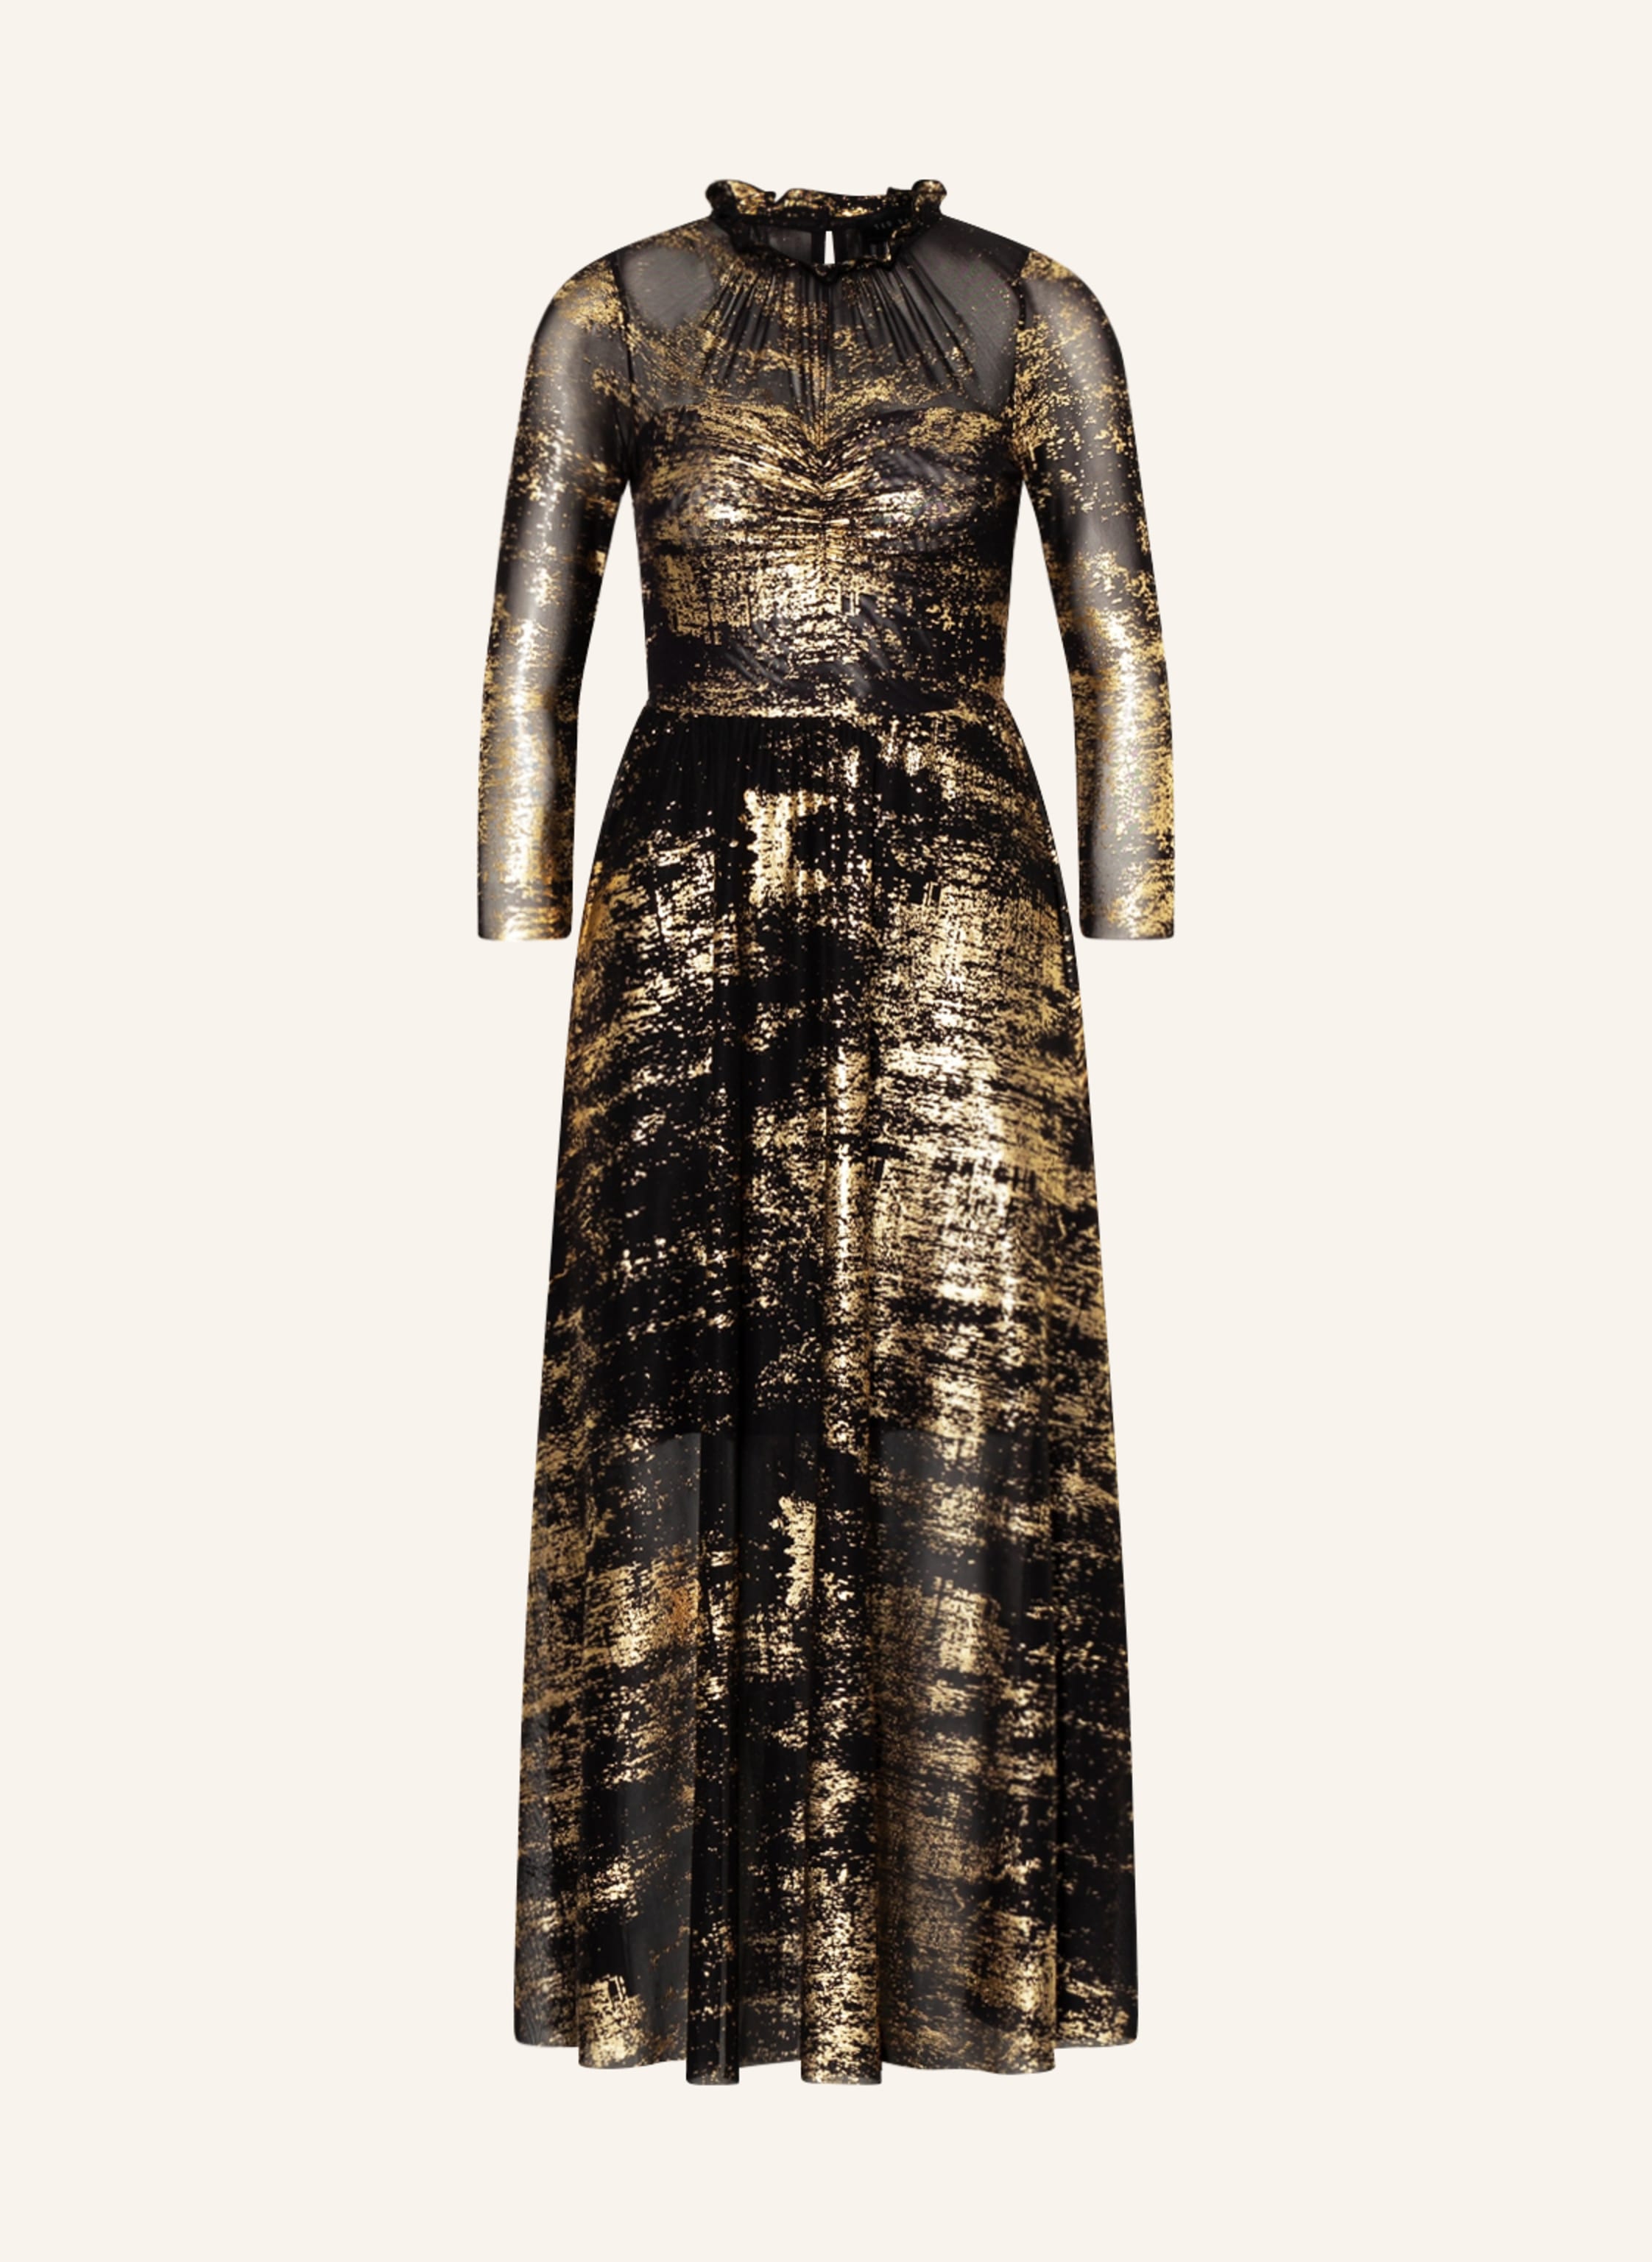 TED BAKER Dress IGGIEY with 3/4 sleeves in black/ gold | Breuninger